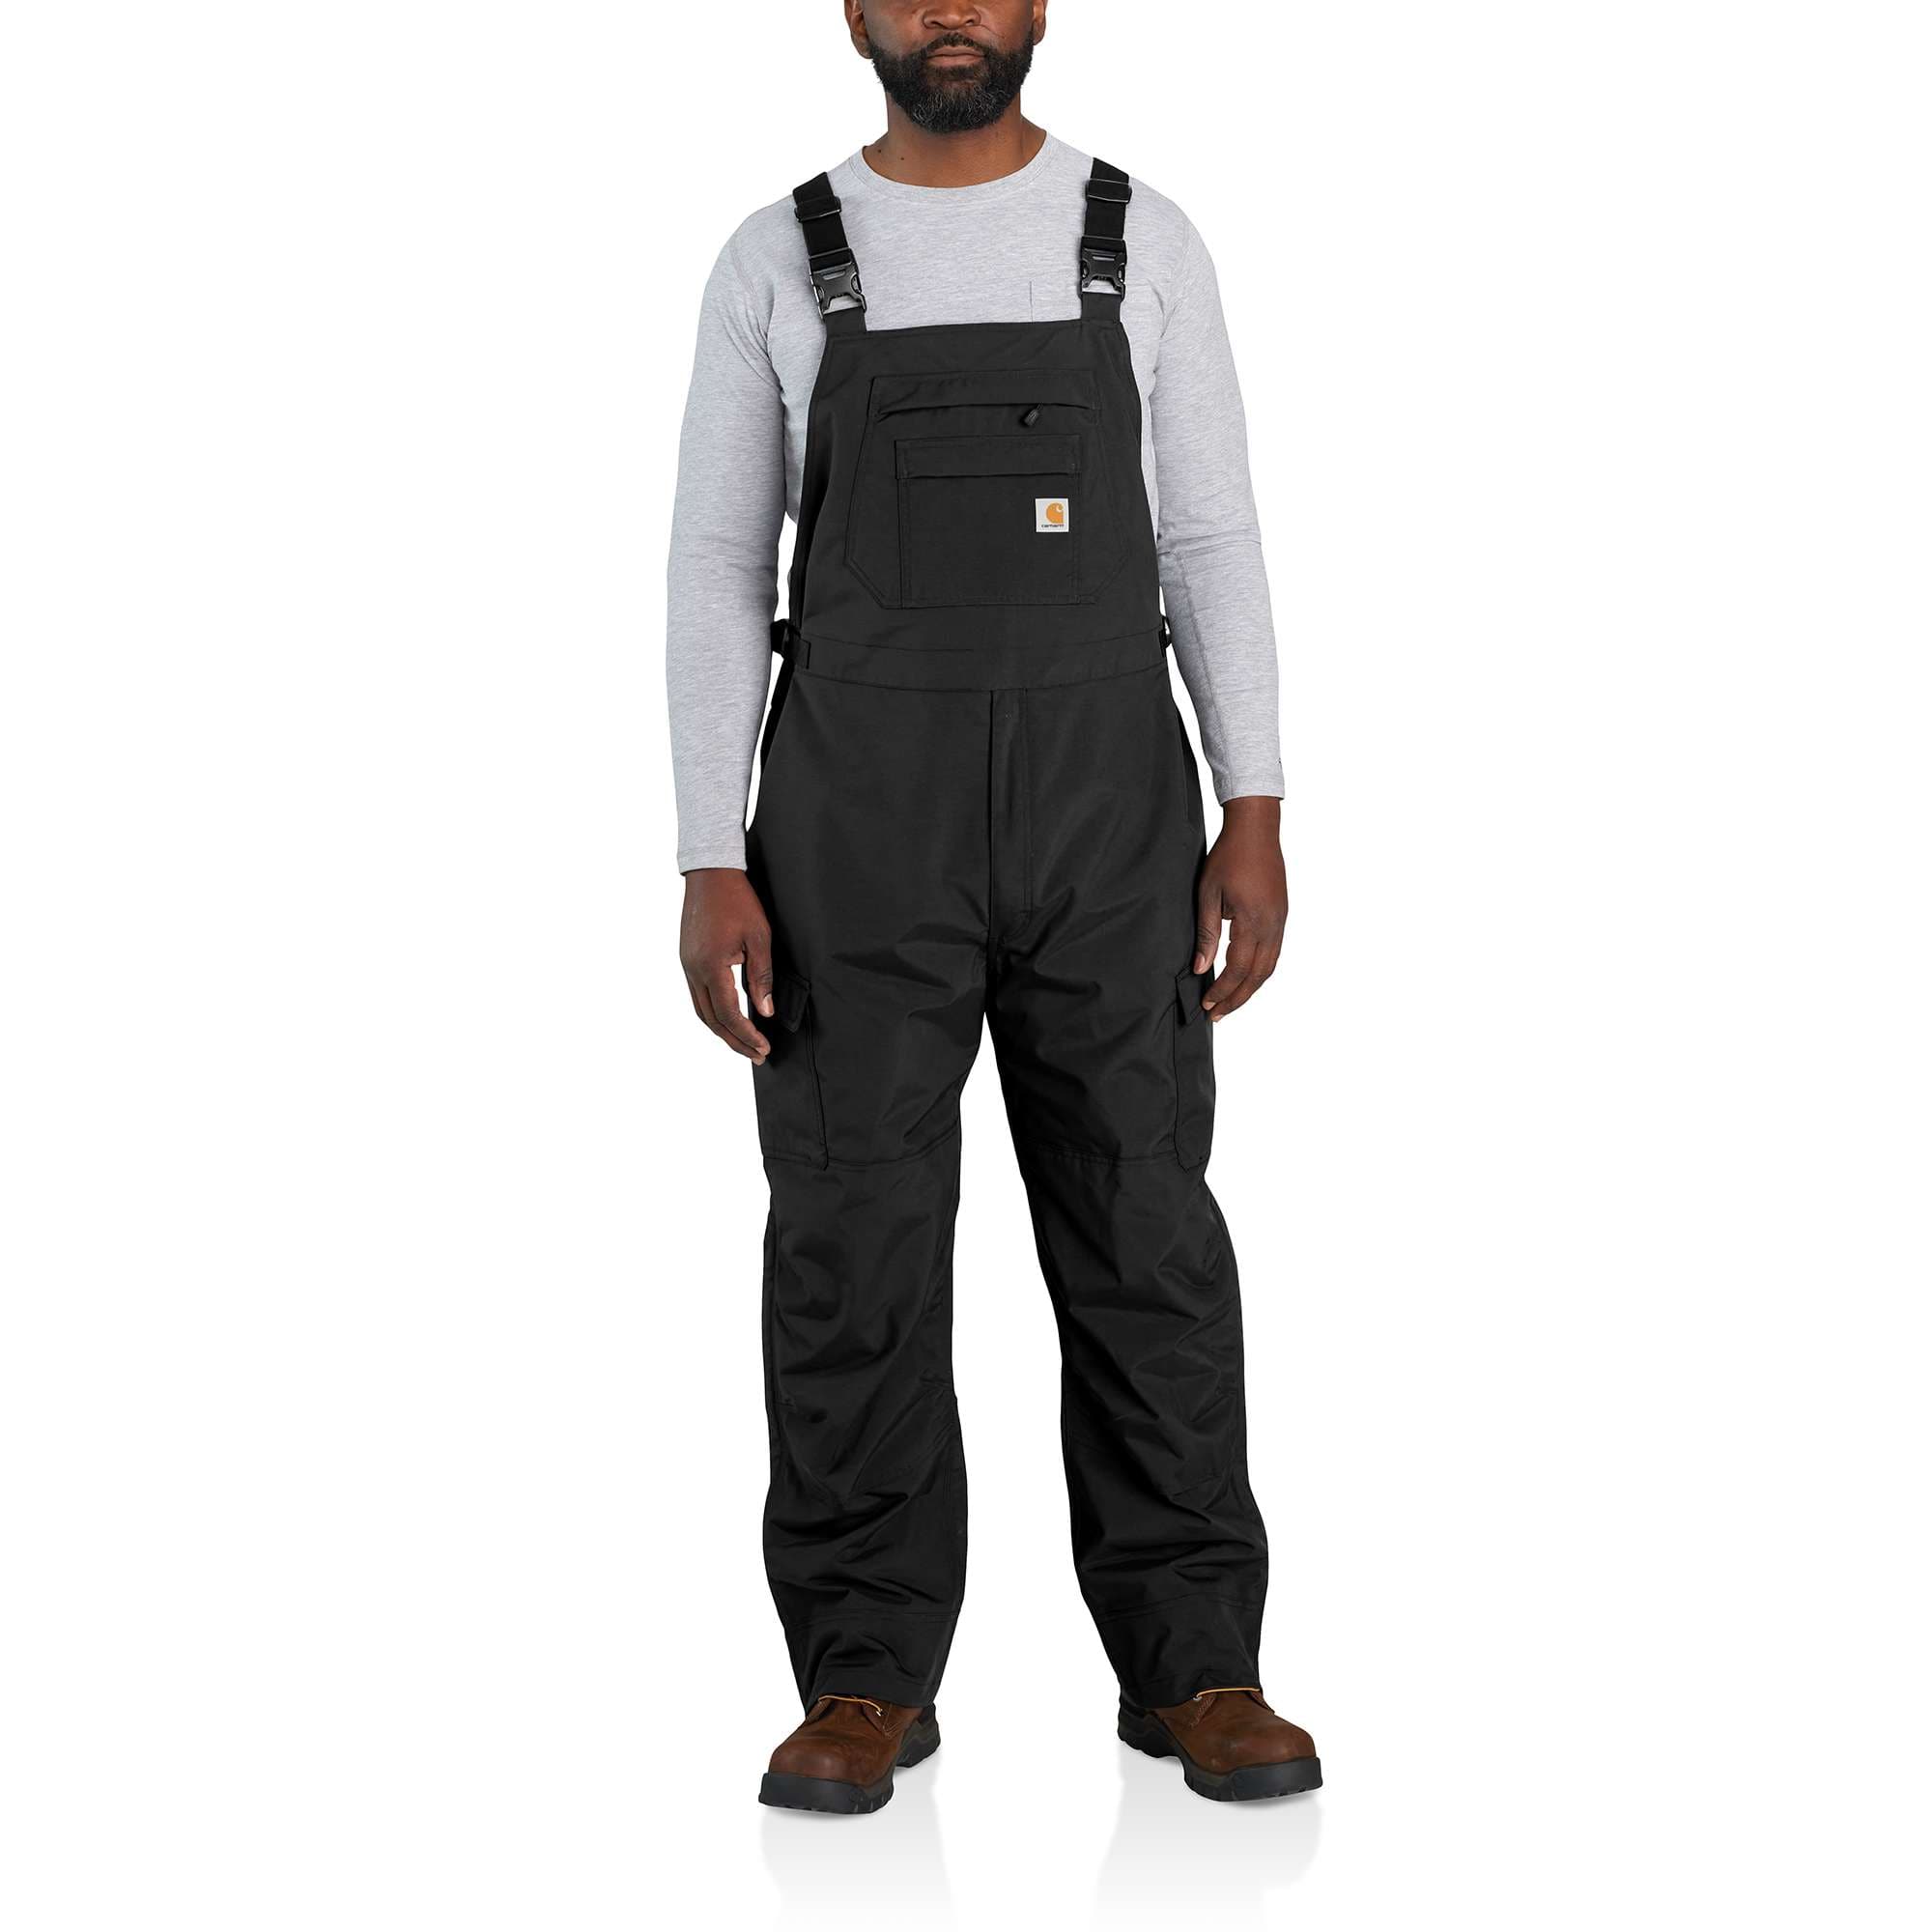 Carhartt Men's Loose Fit Denim Bib Overall - Traditions Clothing & Gift Shop